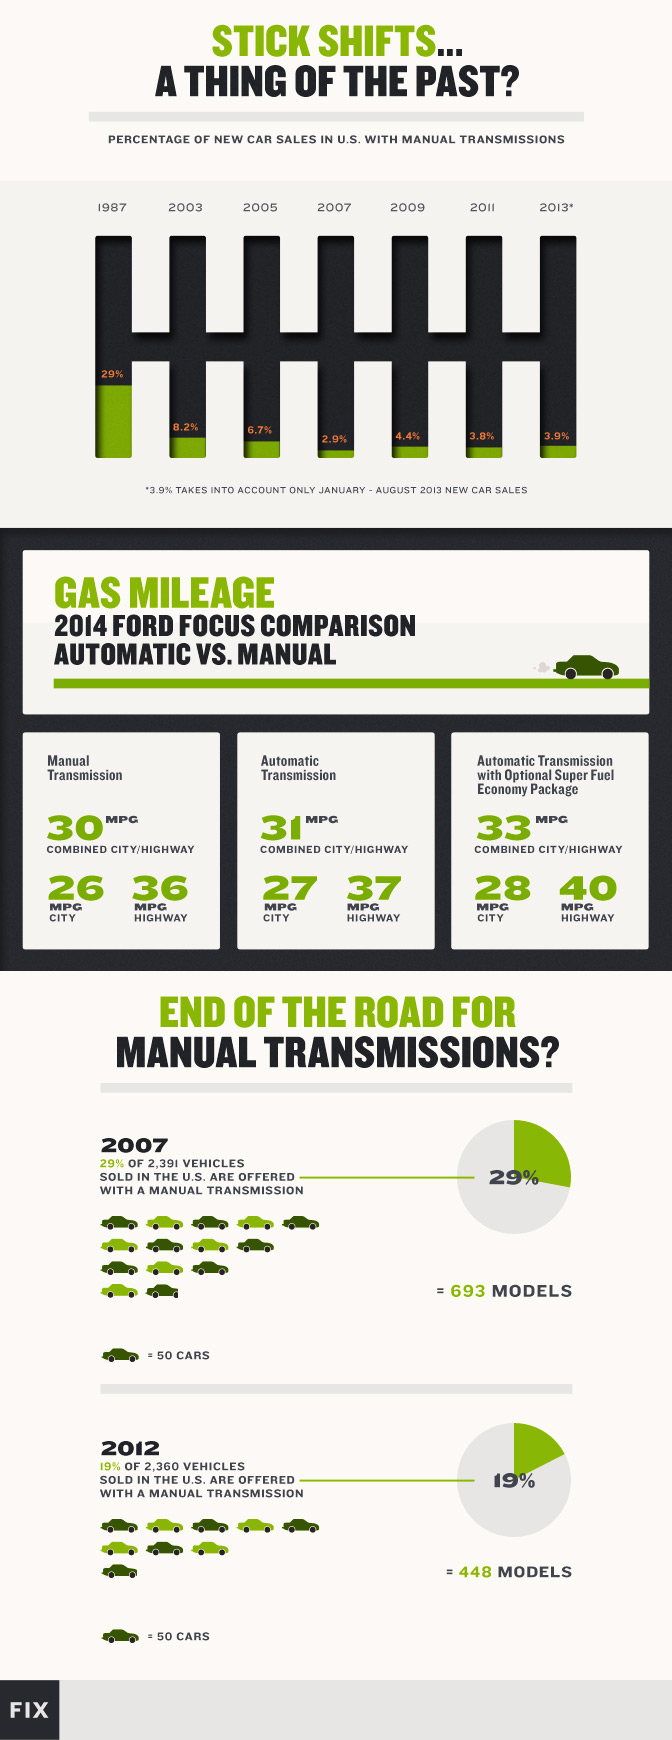 Manual Transmission Sales Nearly Doubled in the Last 2 Years